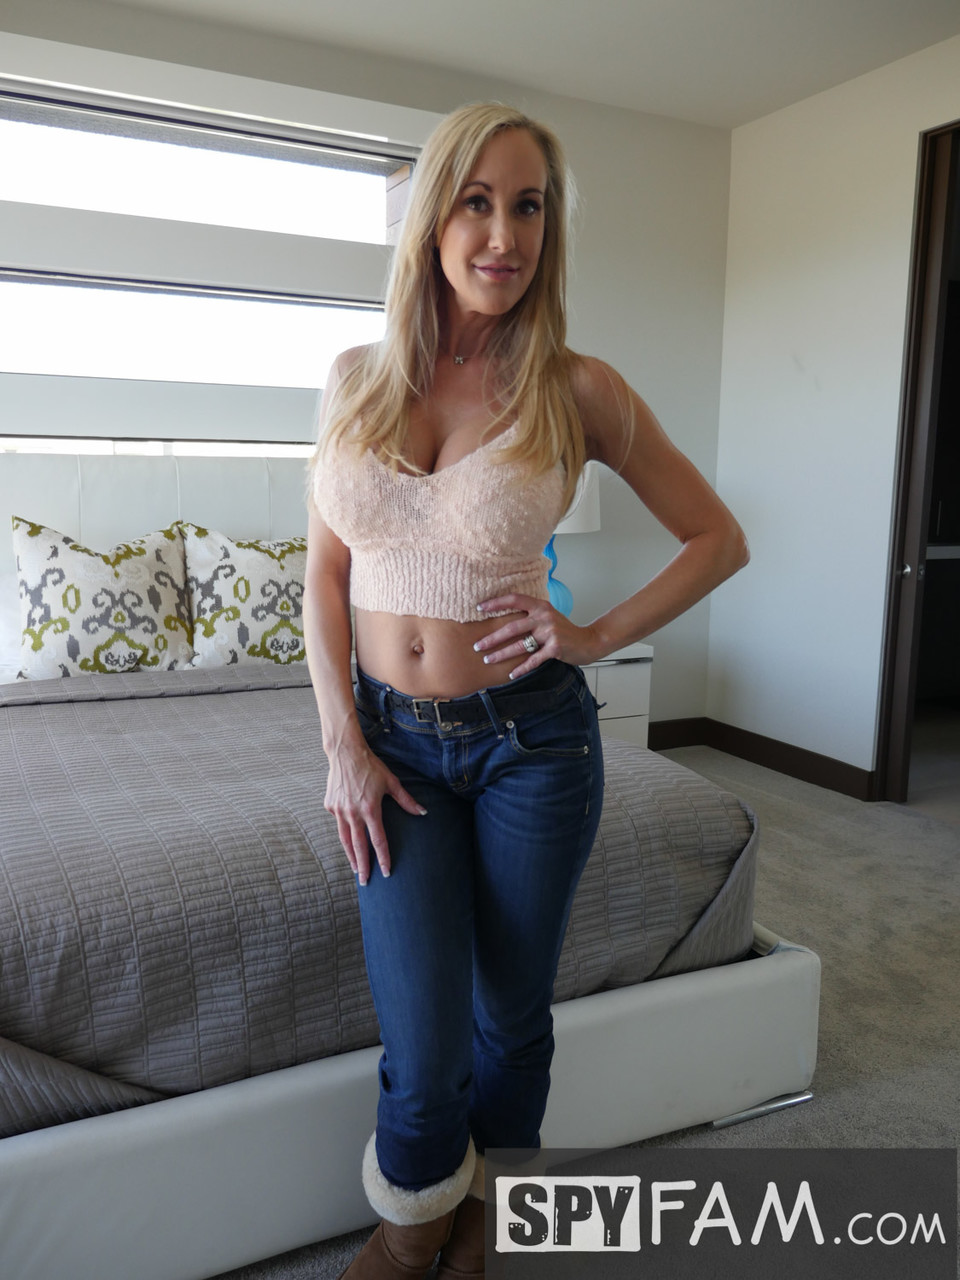 MILF Brandi Love takes off her bra, shows her big tits and ass in the bed porn photo #427193126 | Spy Fam Pics, Brandi Love, Mom, mobile porn